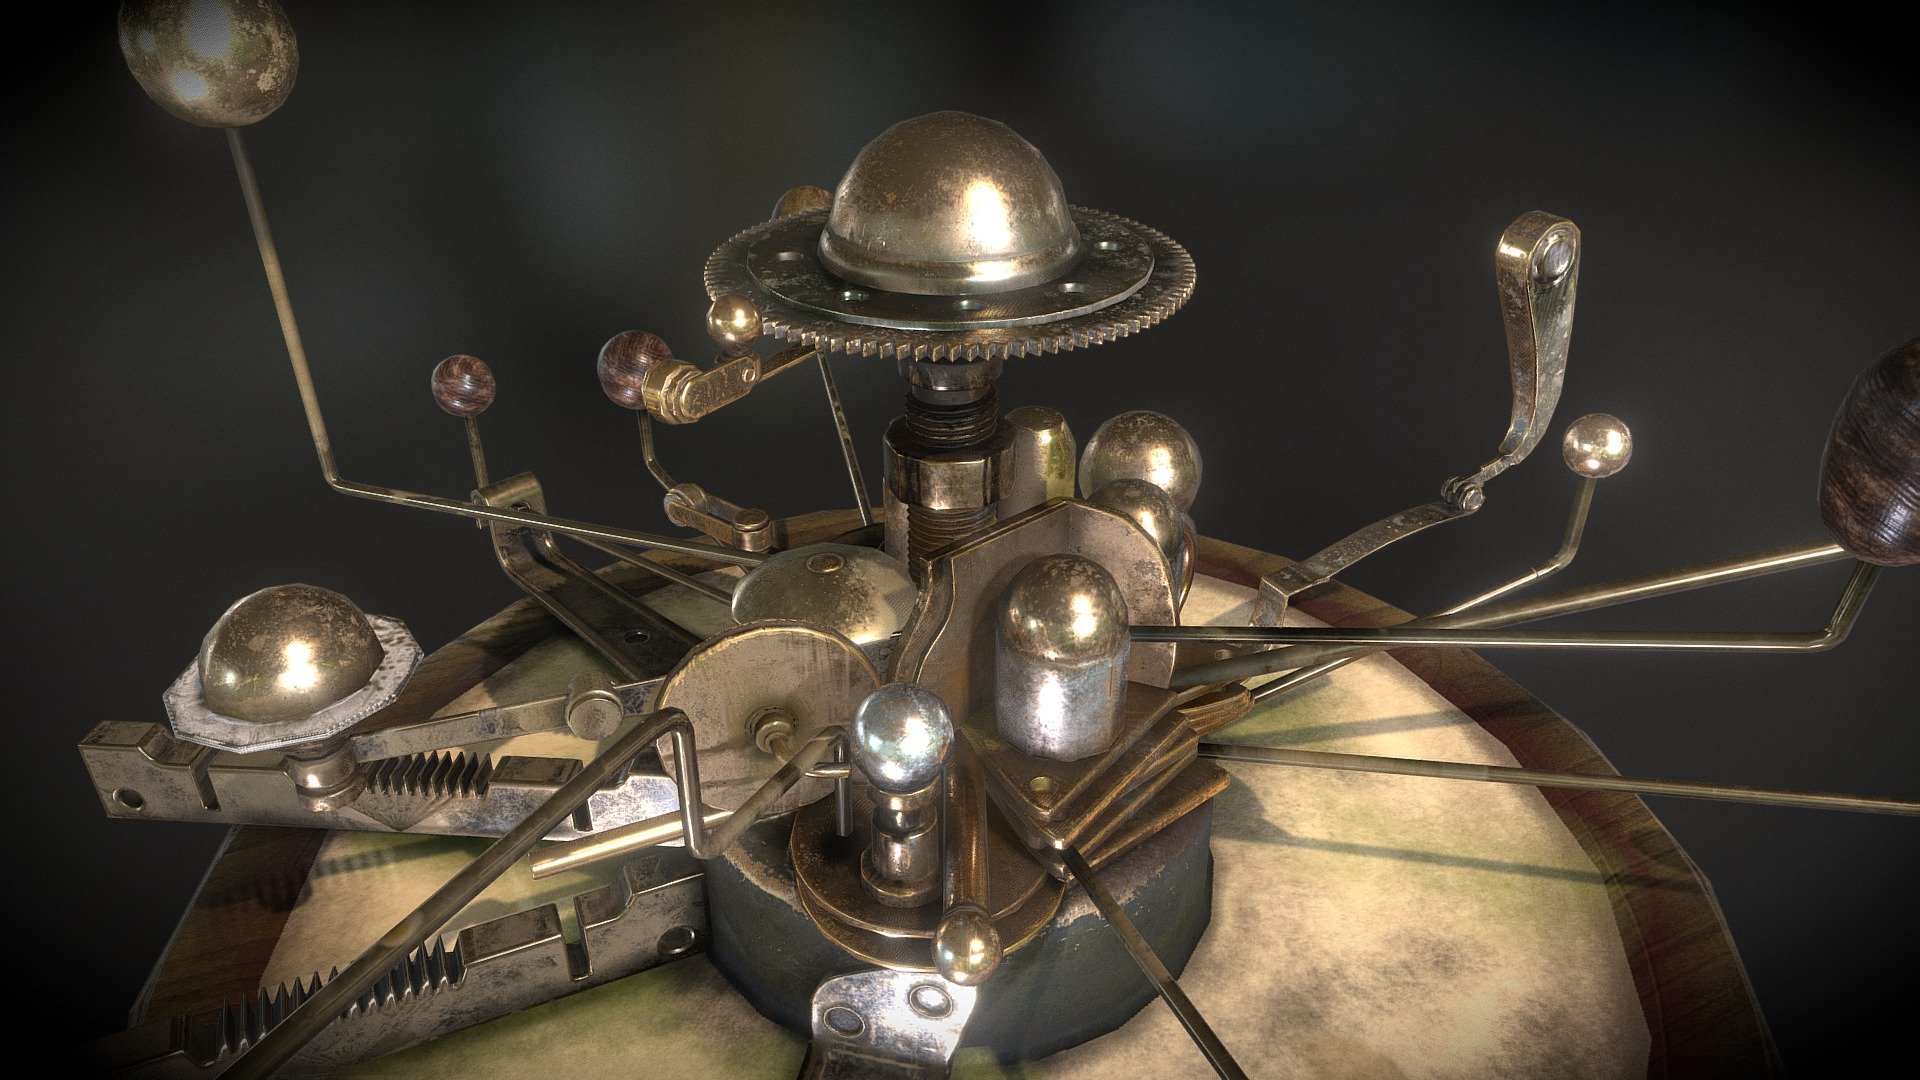 Orrery design for University creative task, modelled using Maya and textured using substance painter - Orrery Low Poly - 3D model by khula_h (@theprimera) 3d model